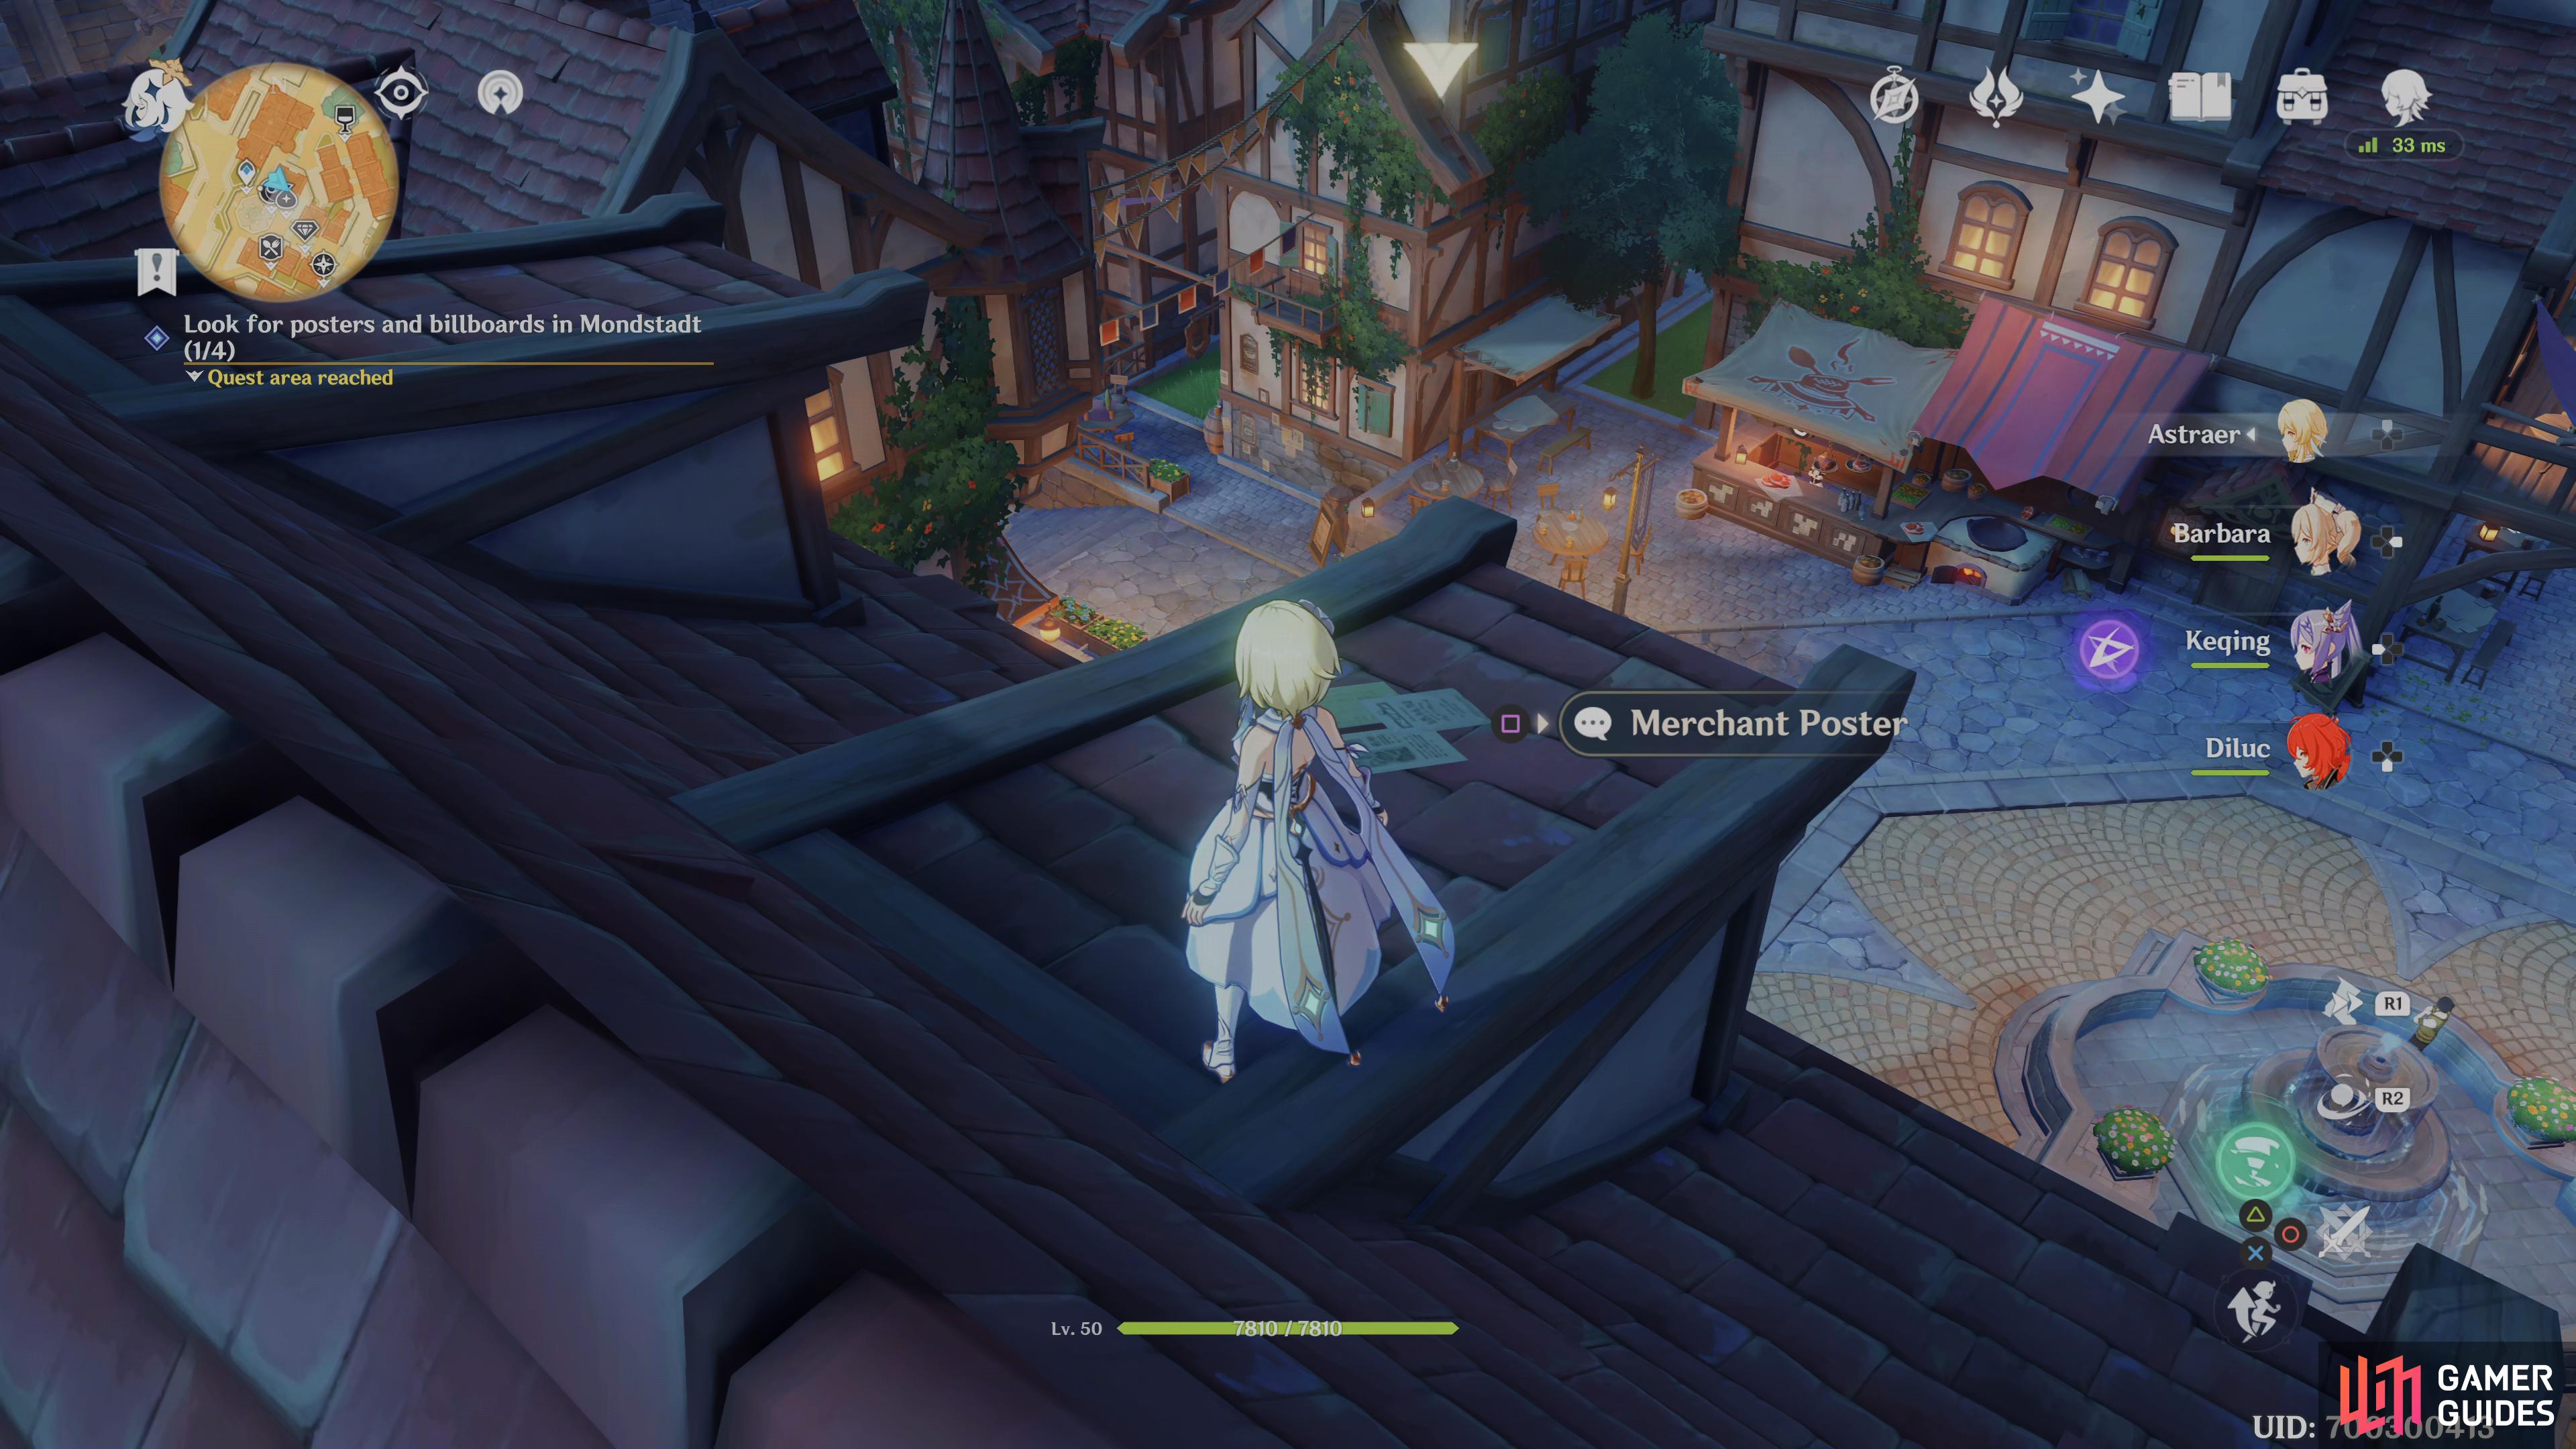 Poster #1 is on top of the Alchemy bench house